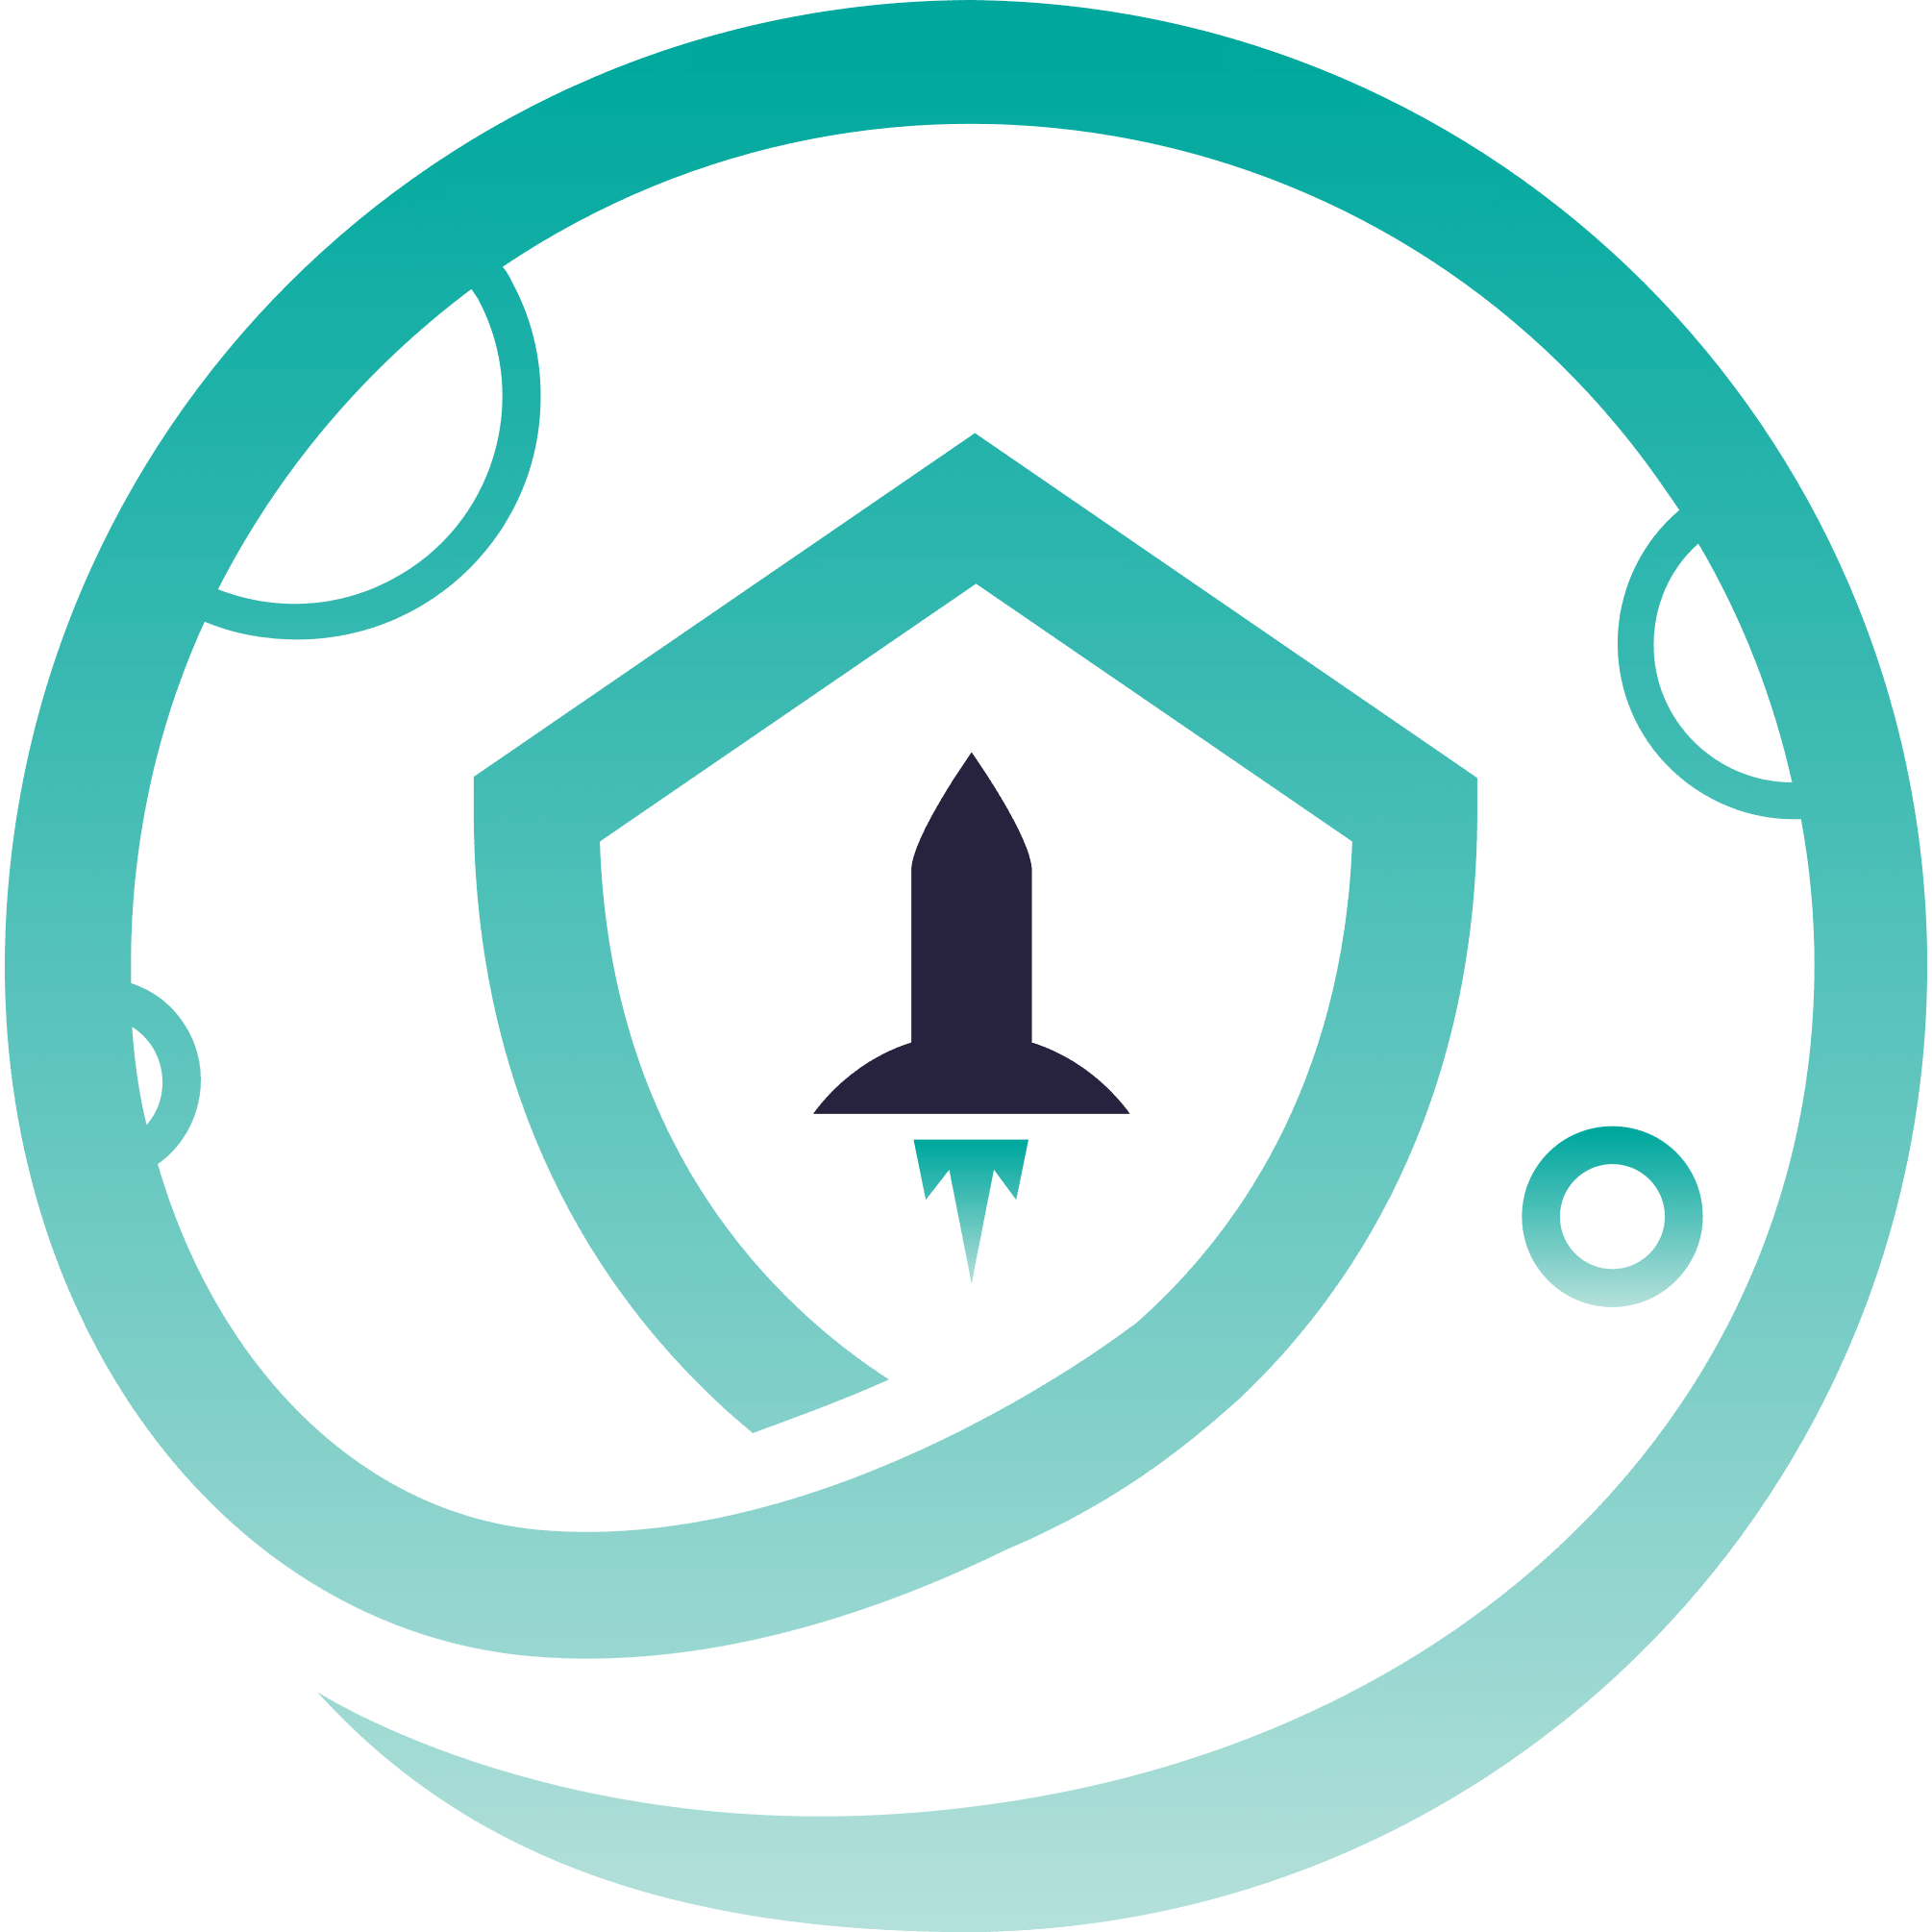 SafeMoon logo in png format